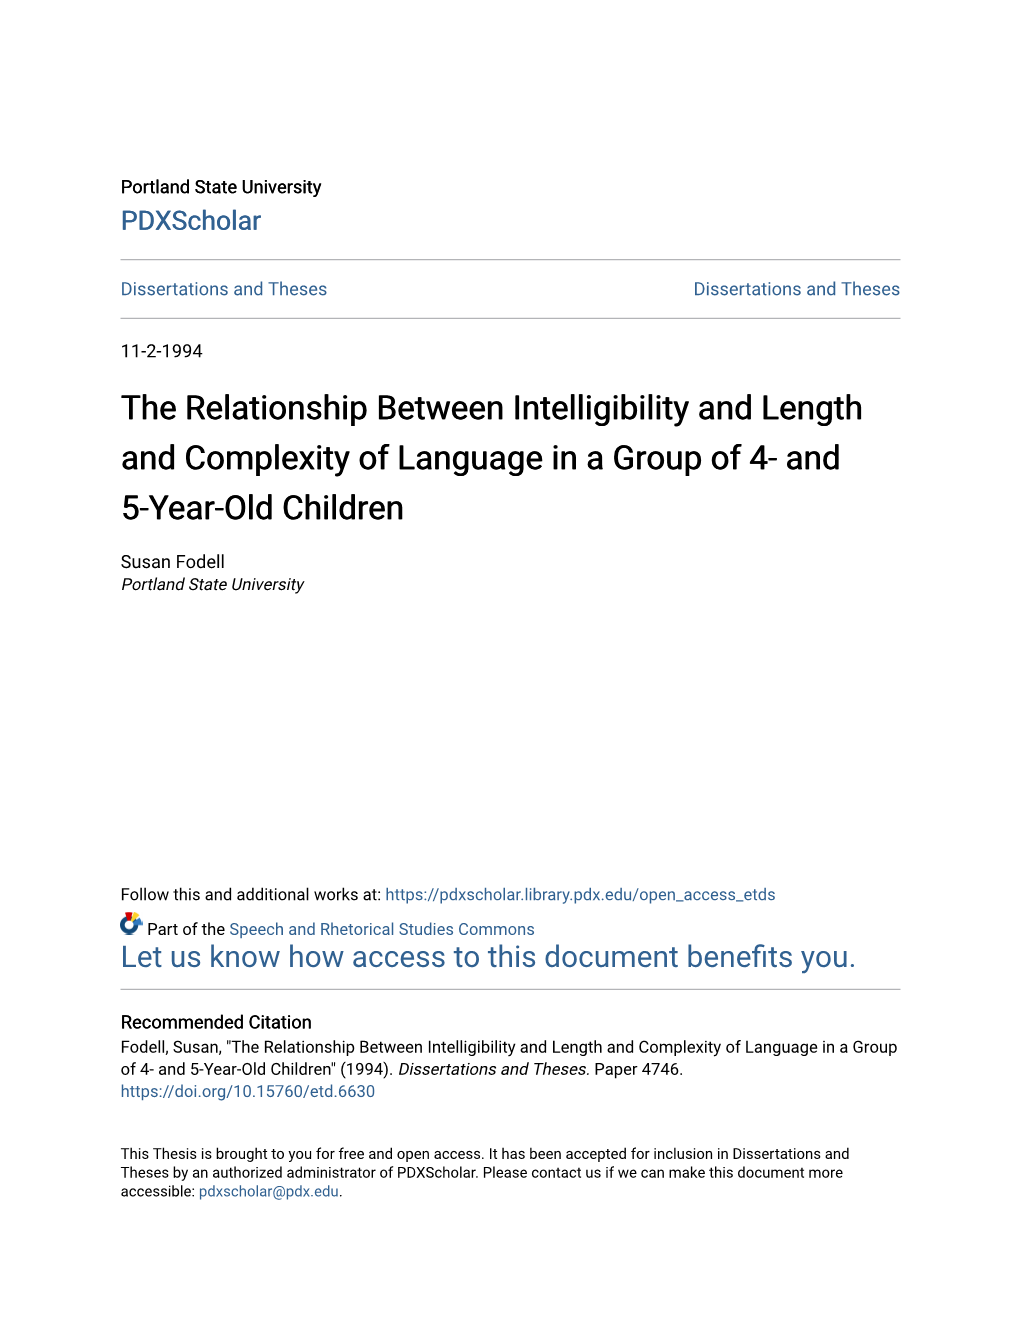 The Relationship Between Intelligibility and Length and Complexity of Language in a Group of 4- and 5-Year-Old Children